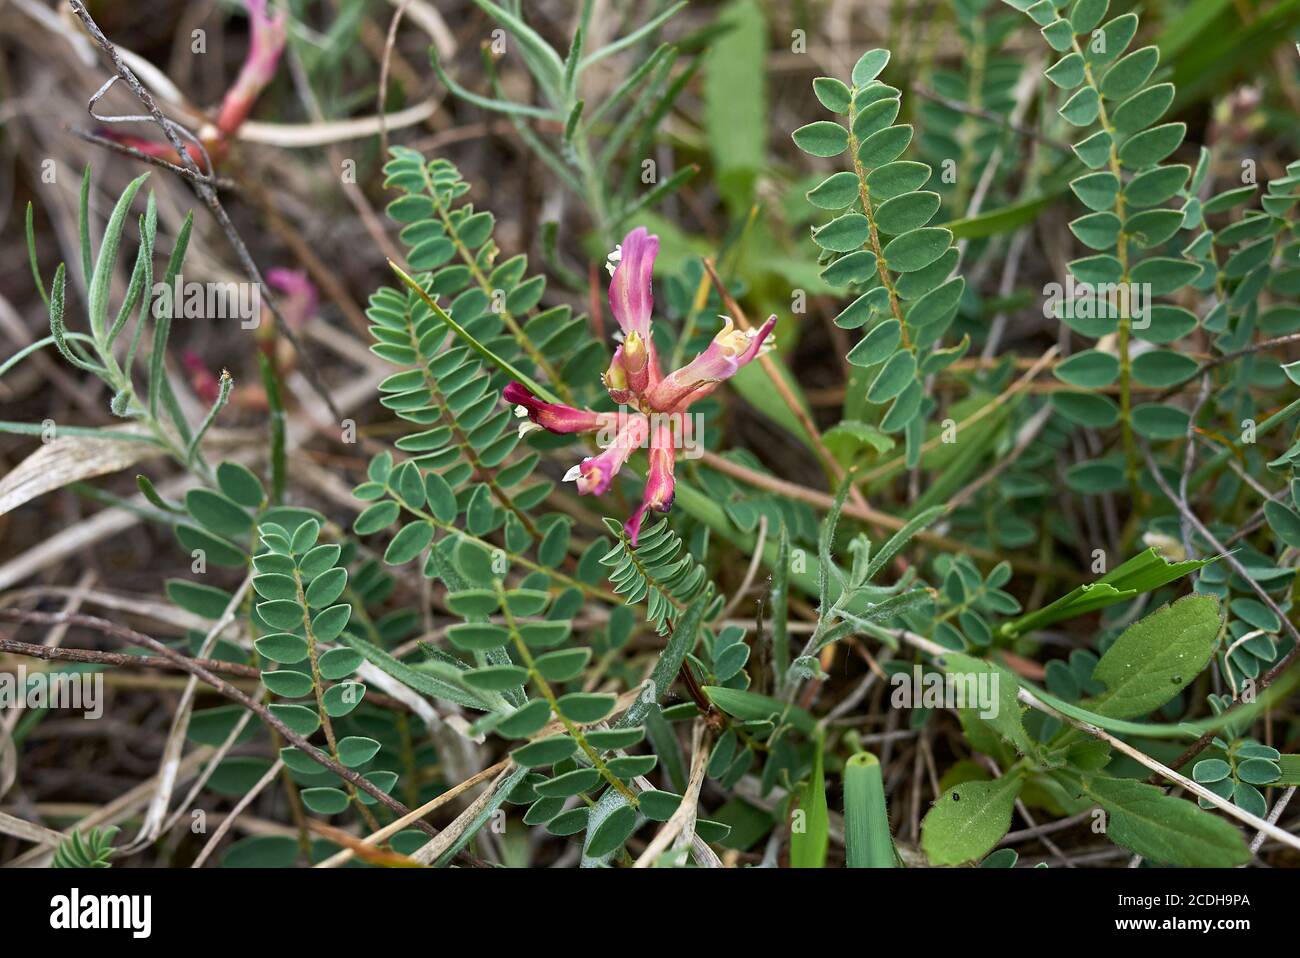 Astragalus monspessulanus pink flower and leaves close up Stock Photo